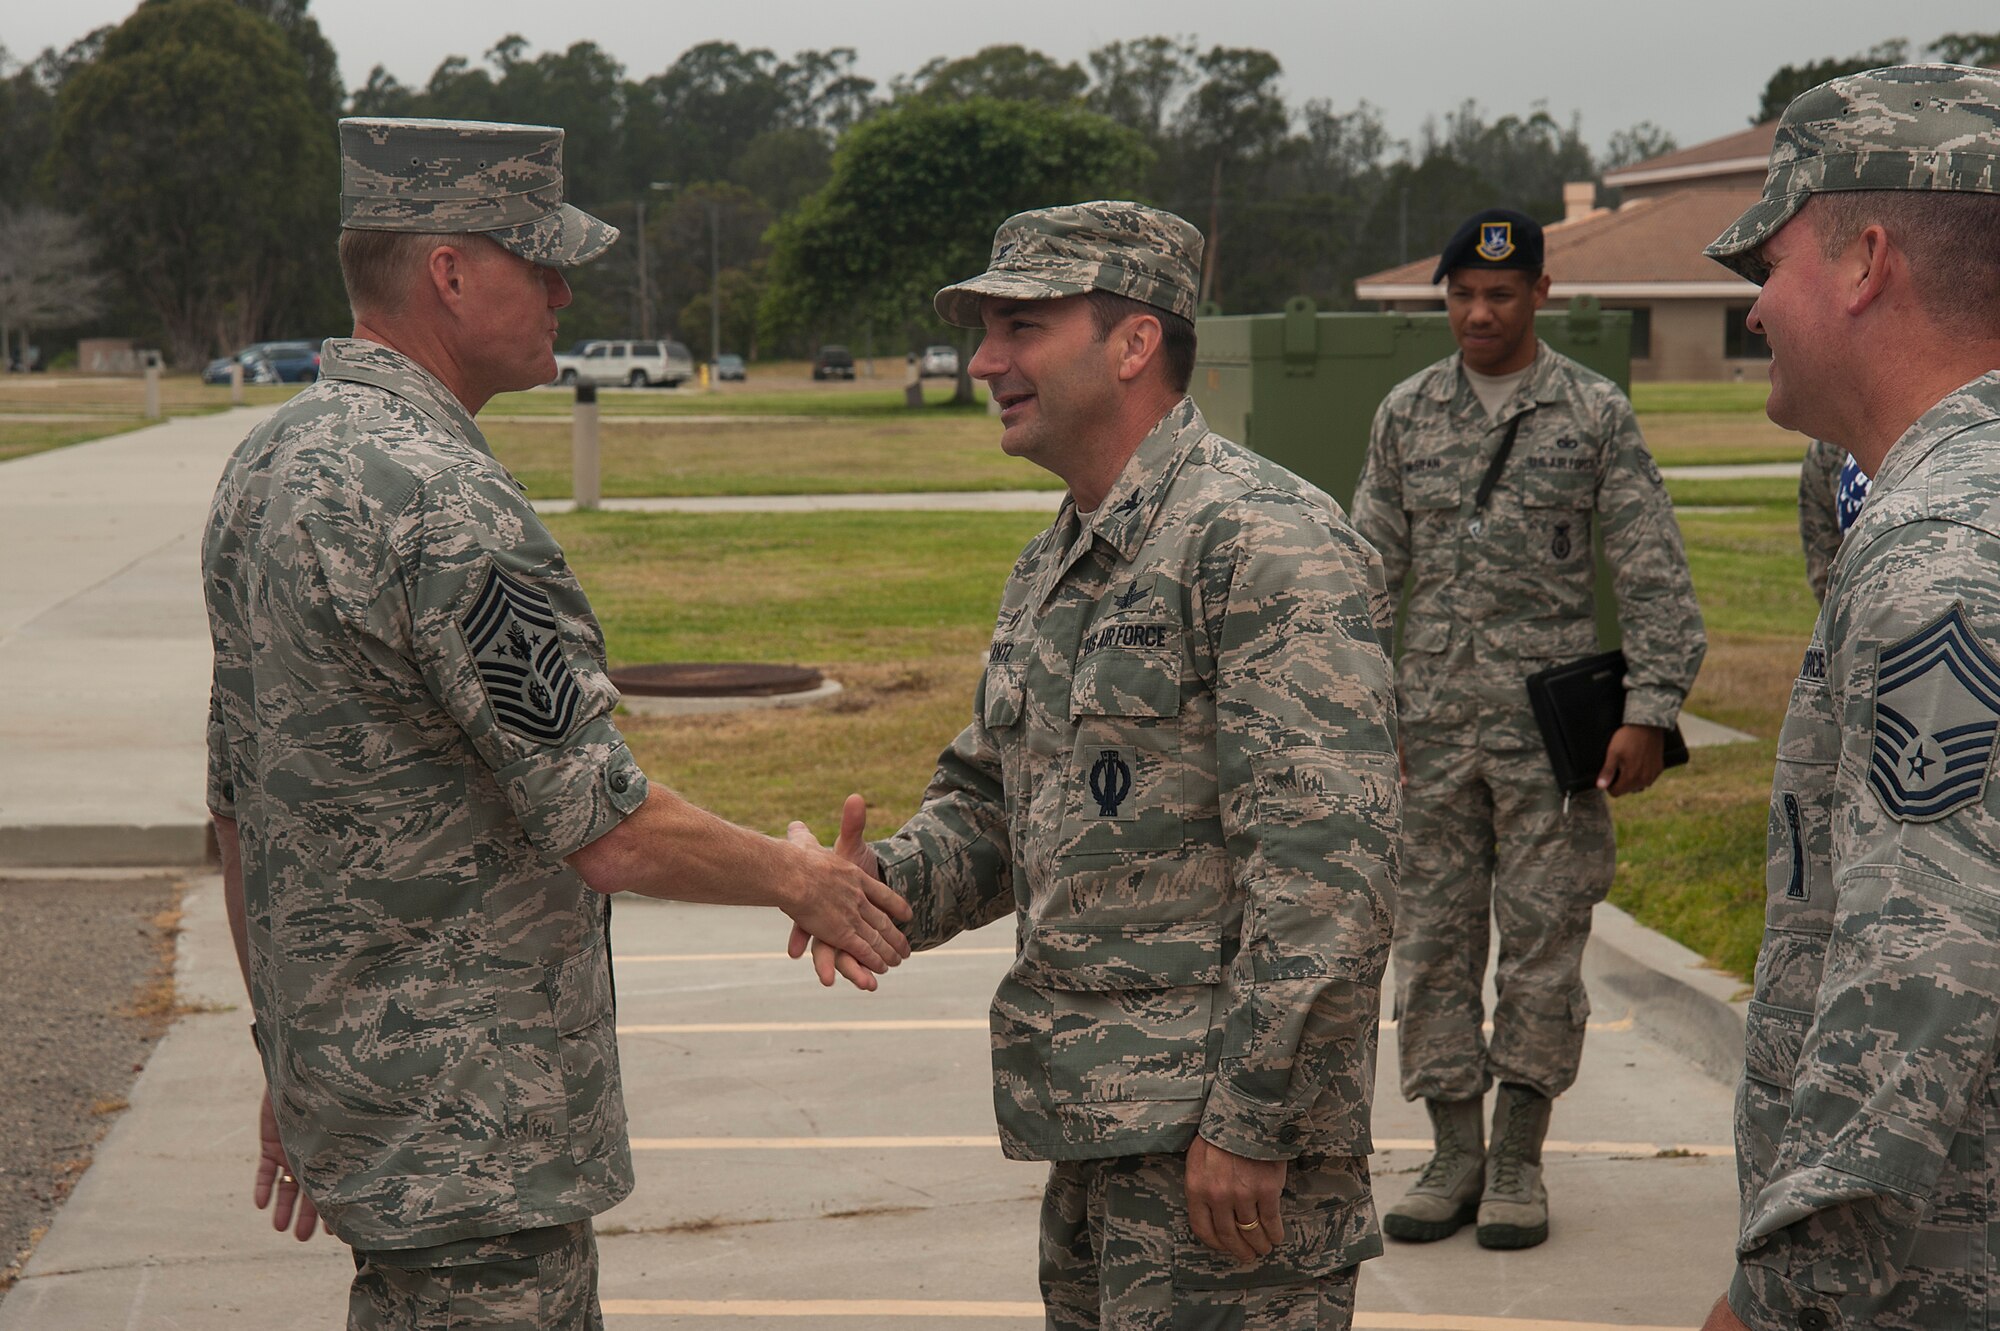 Col Max Lantz, 381st Training Group commander, greets Chief Master Sgt. of the Air Force, James A. Cody, prior to his tour of the 381st TRG campus, July 8, 2014, Vandenberg Air Force Base, Calif. During his visit with the 381st TRG, Cody had the opportunity to interact with enlisted students currently in training as space operators and missile maintainers. (U.S. Air Force photo by Michael Peterson/Released)